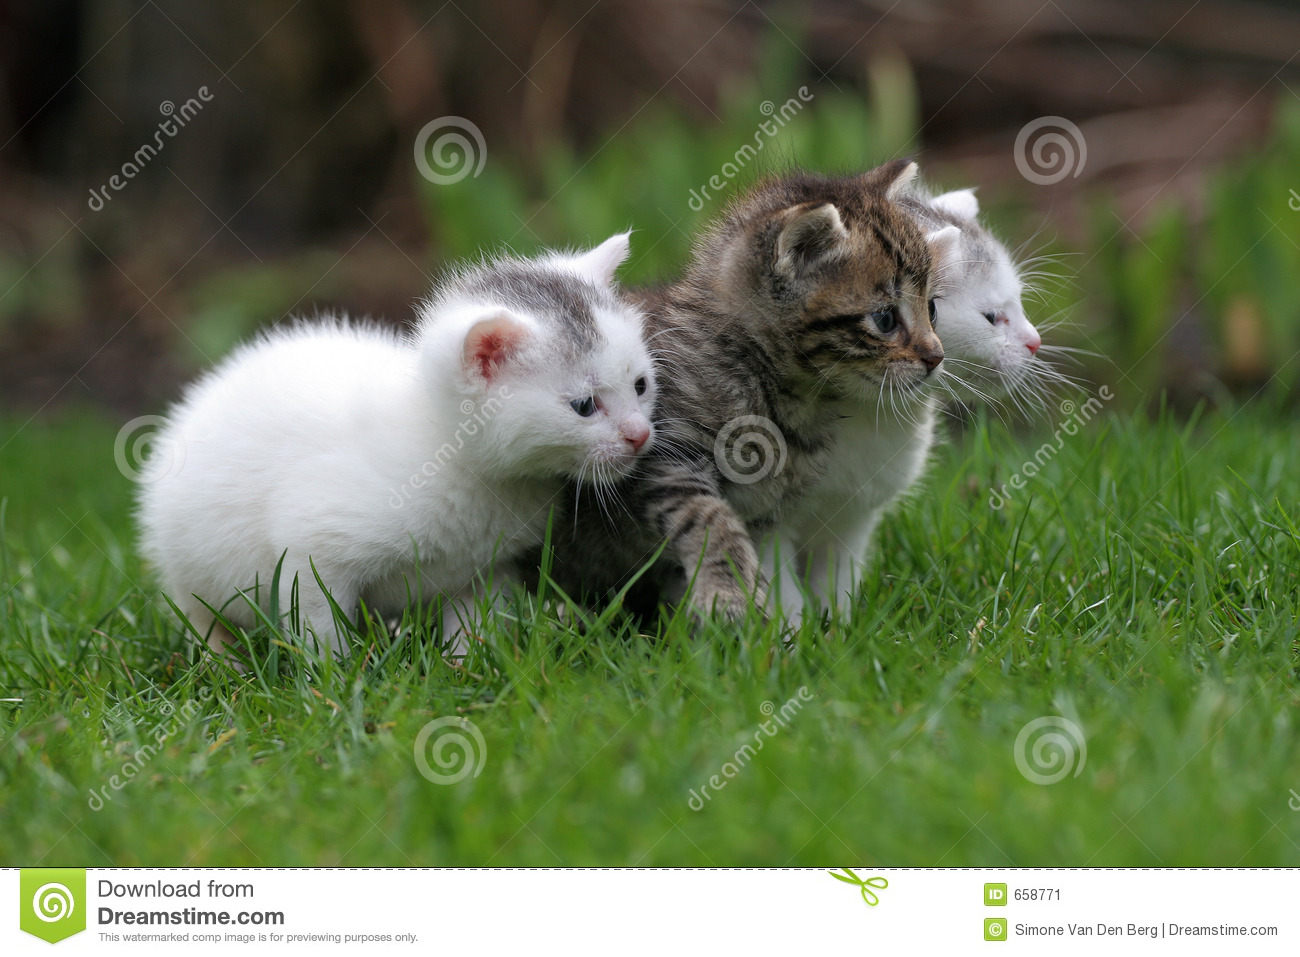 Three Little Kittens Sitting Outside In The Grass  Focus Is On Middle